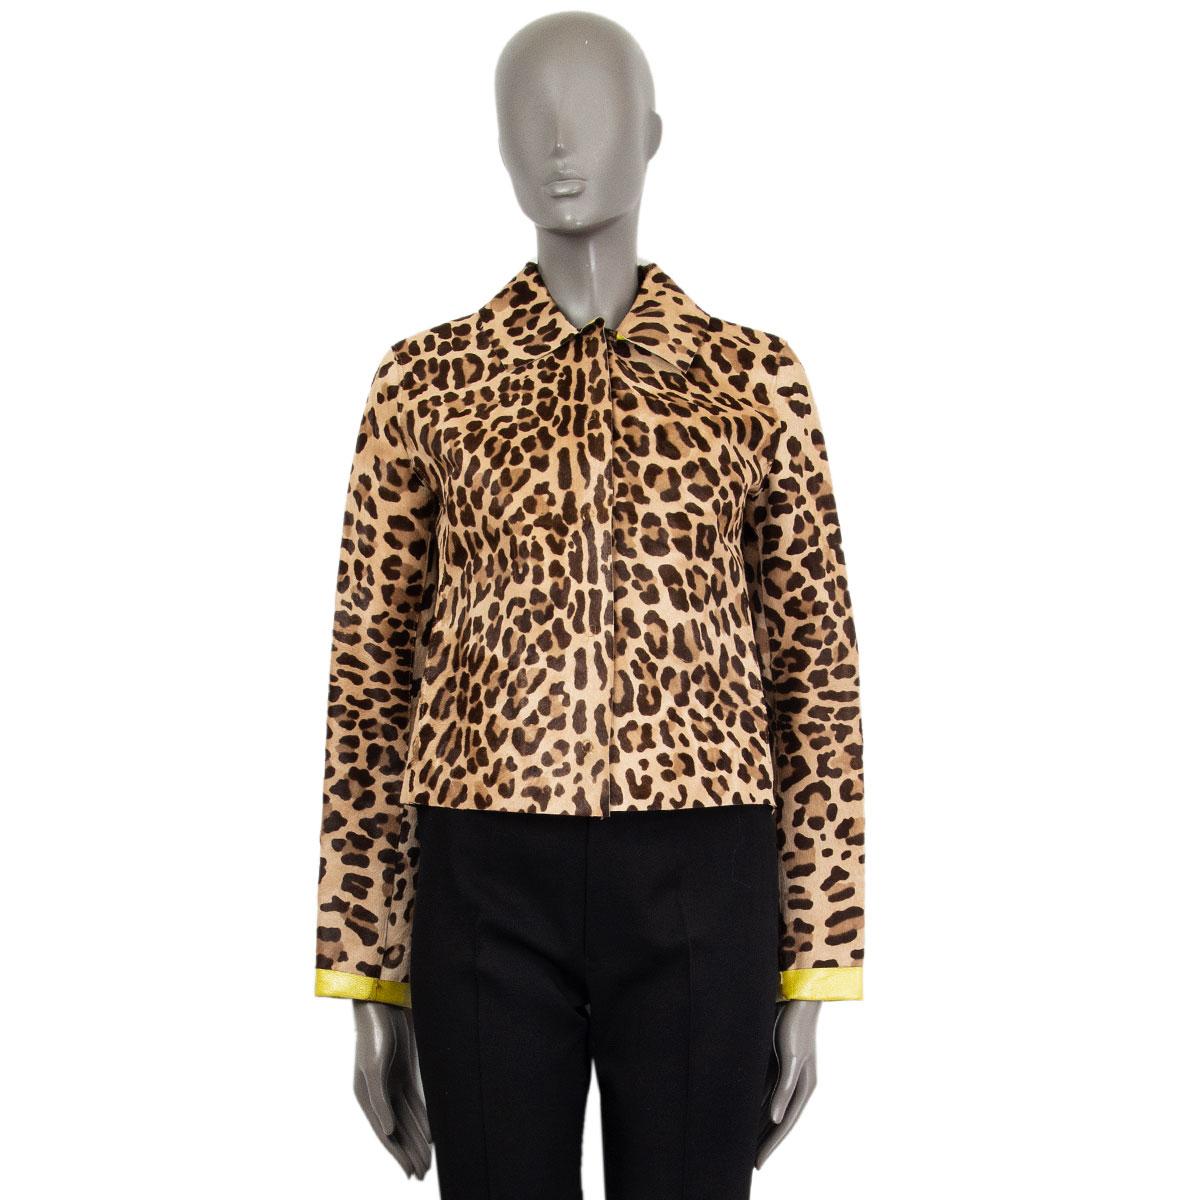 Dolce & Gabbana leopard print short jacket in brown, mocha and beige calf-hair (tag has been removed) with a flat collar. Closes on the front with snap buttons. Inner leather is neon green and cuffs can be folded to shower color contrast. Has been